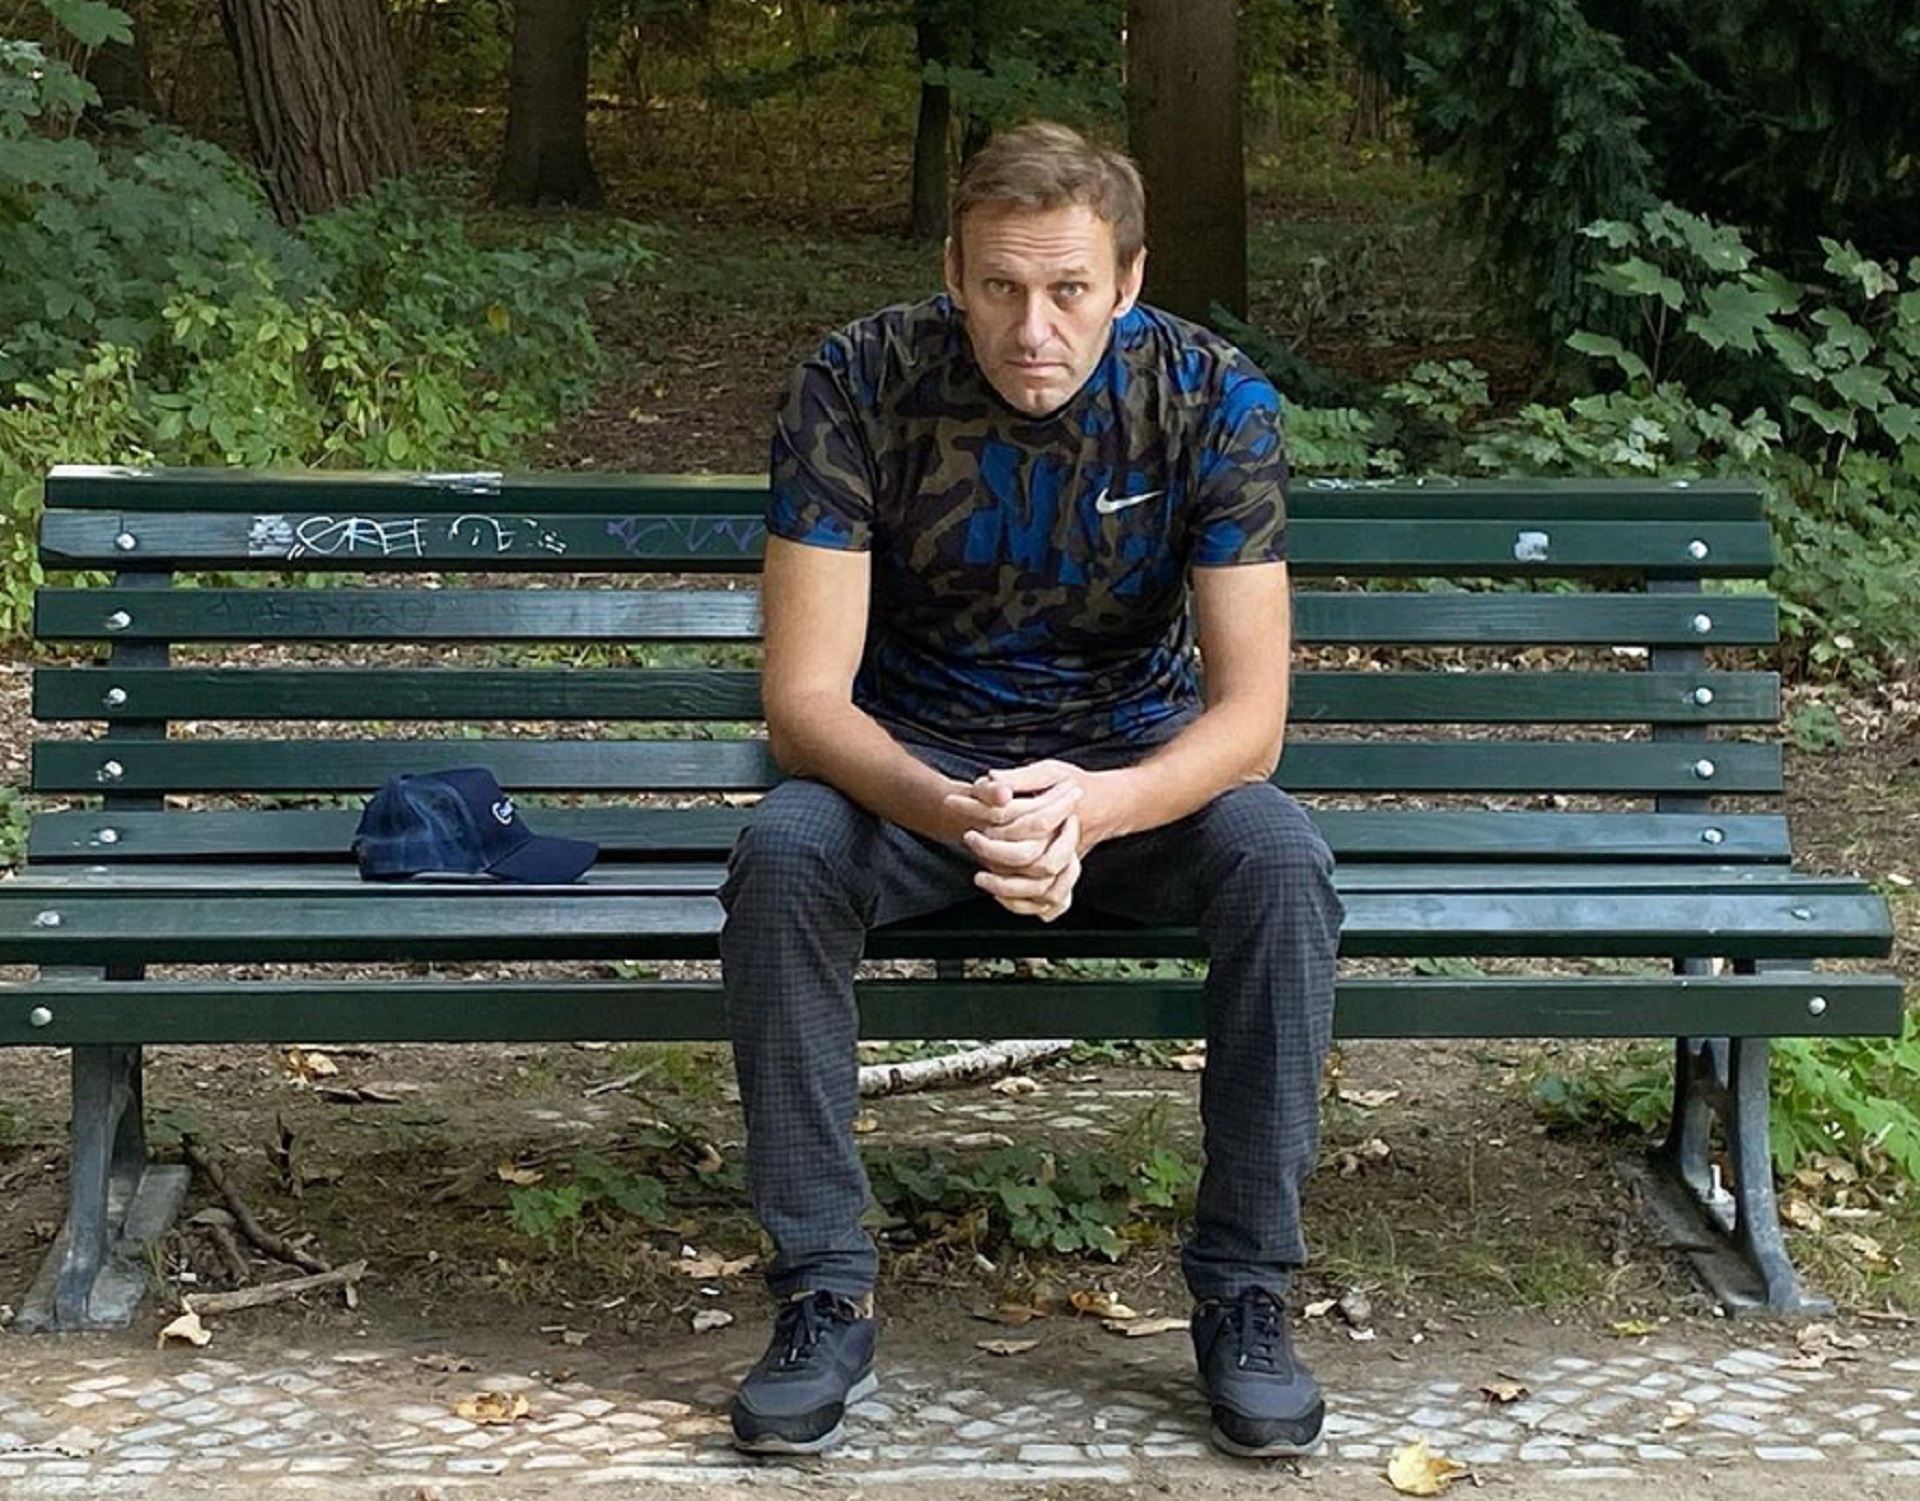 epa08690622 An undated, recent handout photo made available by Russian opposition leader Alexei Navalny via his Instagram site shows Navalny sitting on a bench at an undisclosed location, issued 23 September 2020. According to a statement of the Charite hospital Navalny was discharged from acute inpatient care on 22 September. Given his progress and current condition, the treating physicians believe that complete recovery is possible, Charite stated.  EPA/ALEXEI NAVALNY HANDOUT  HANDOUT EDITORIAL USE ONLY/NO SALES